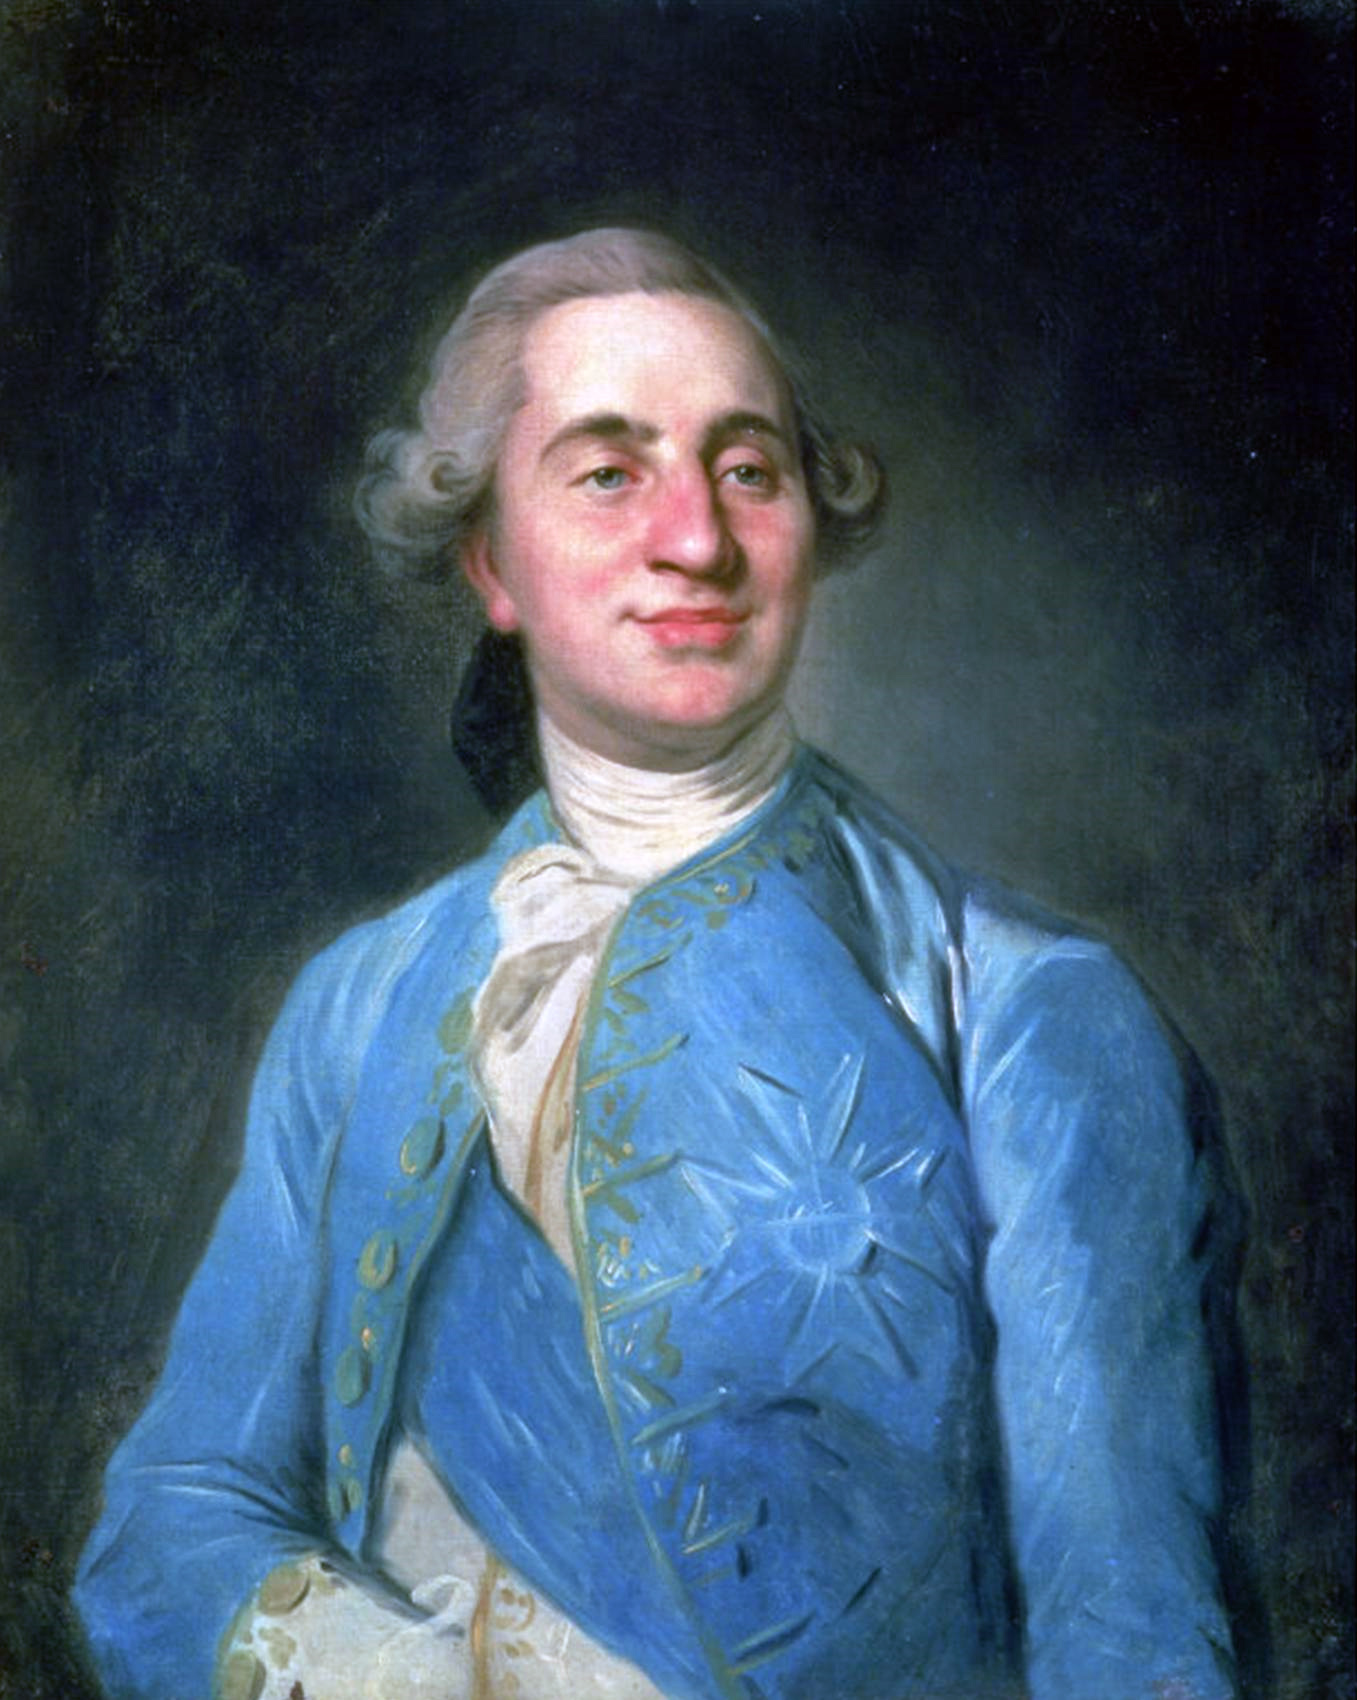 Opinions on Louis XVI of France